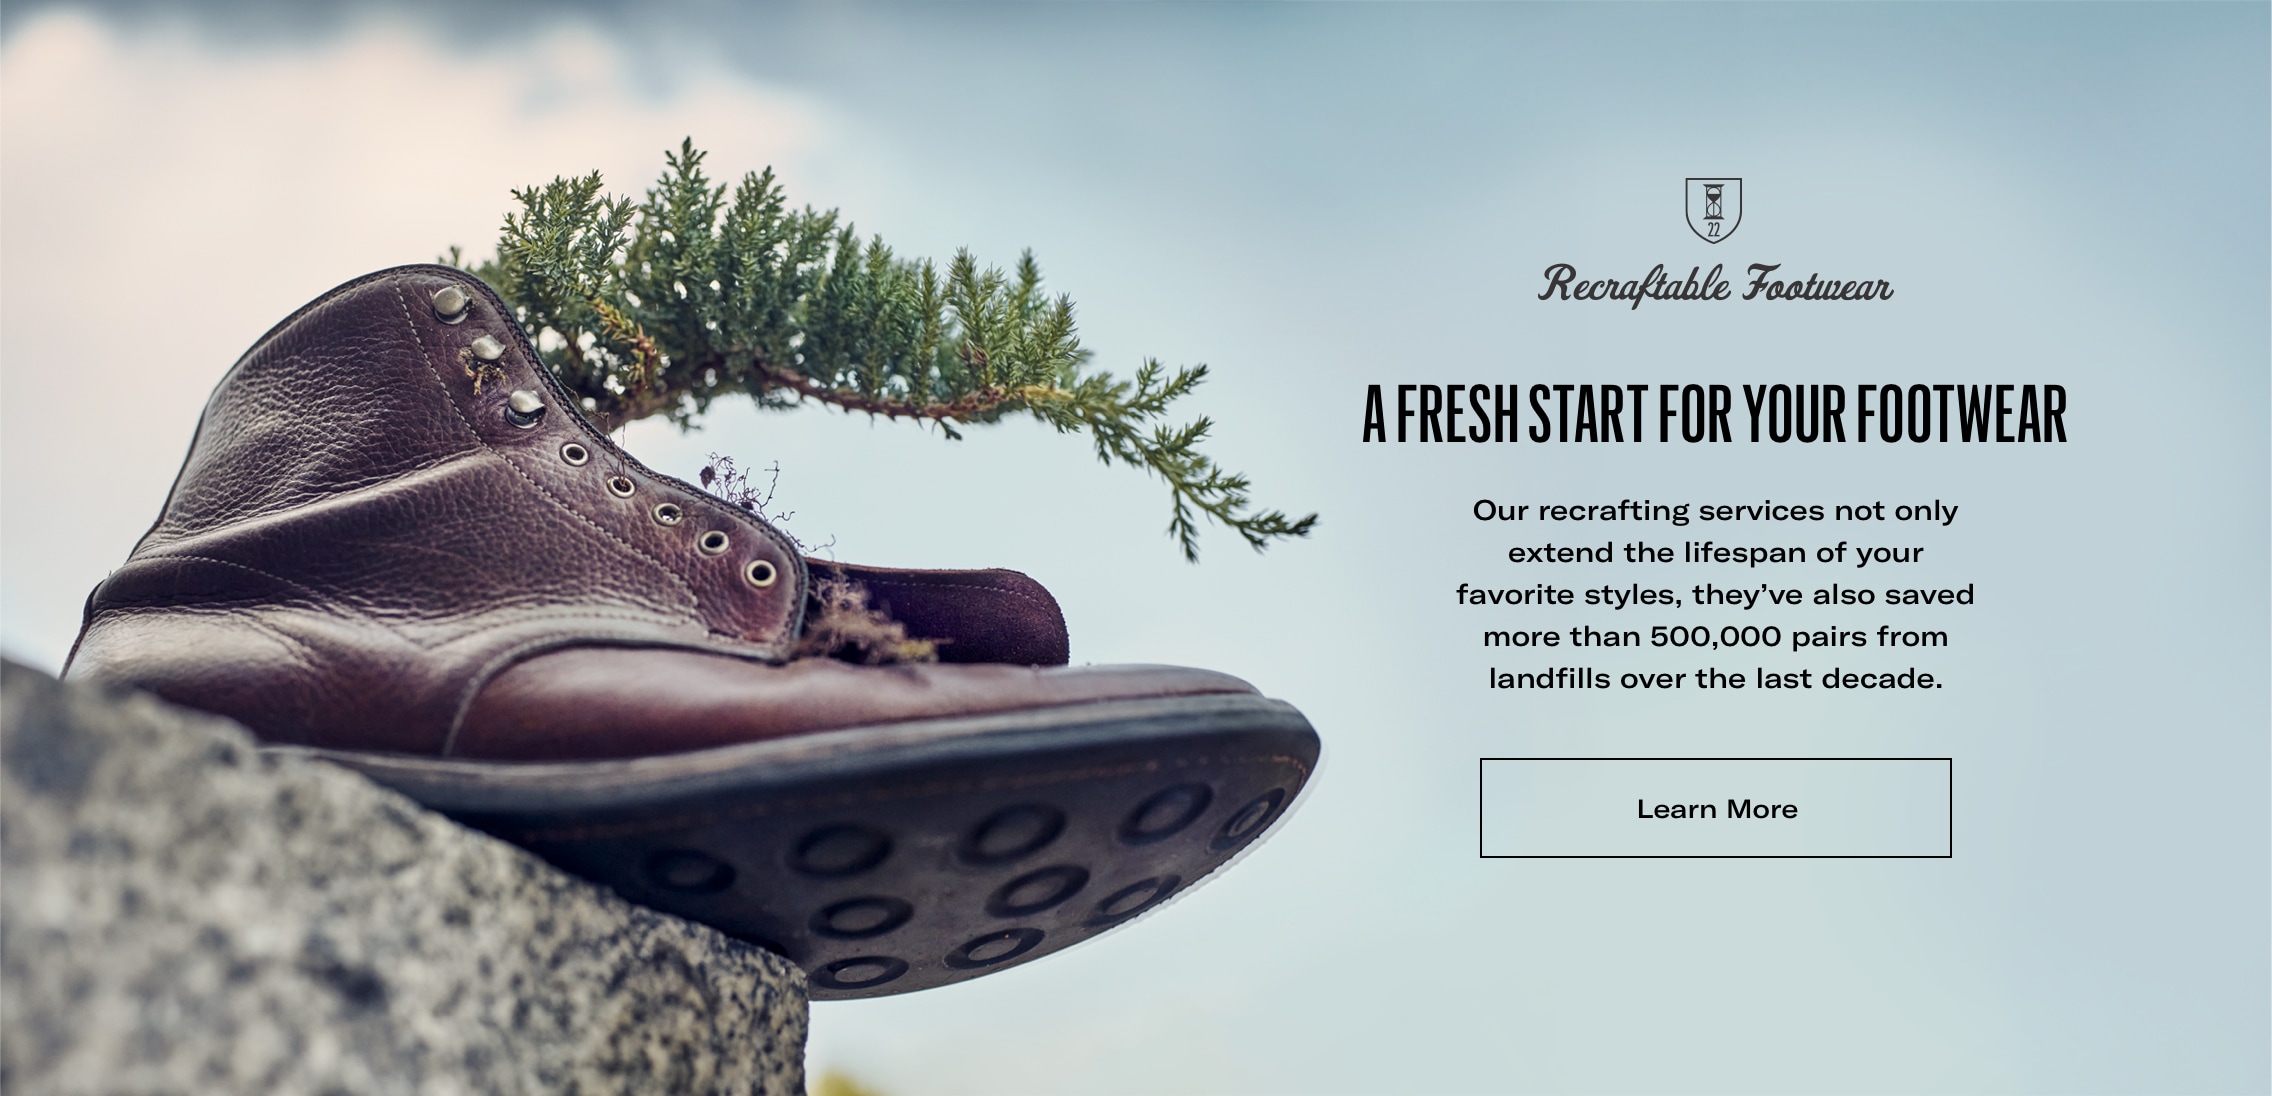 A Fresh Start for your Footwear - Our recrafting services not only extend the lifespan of your favorite styles, they’ve also saved more than 500,000 pairs from landfills over the last decade.. Click to learn more.